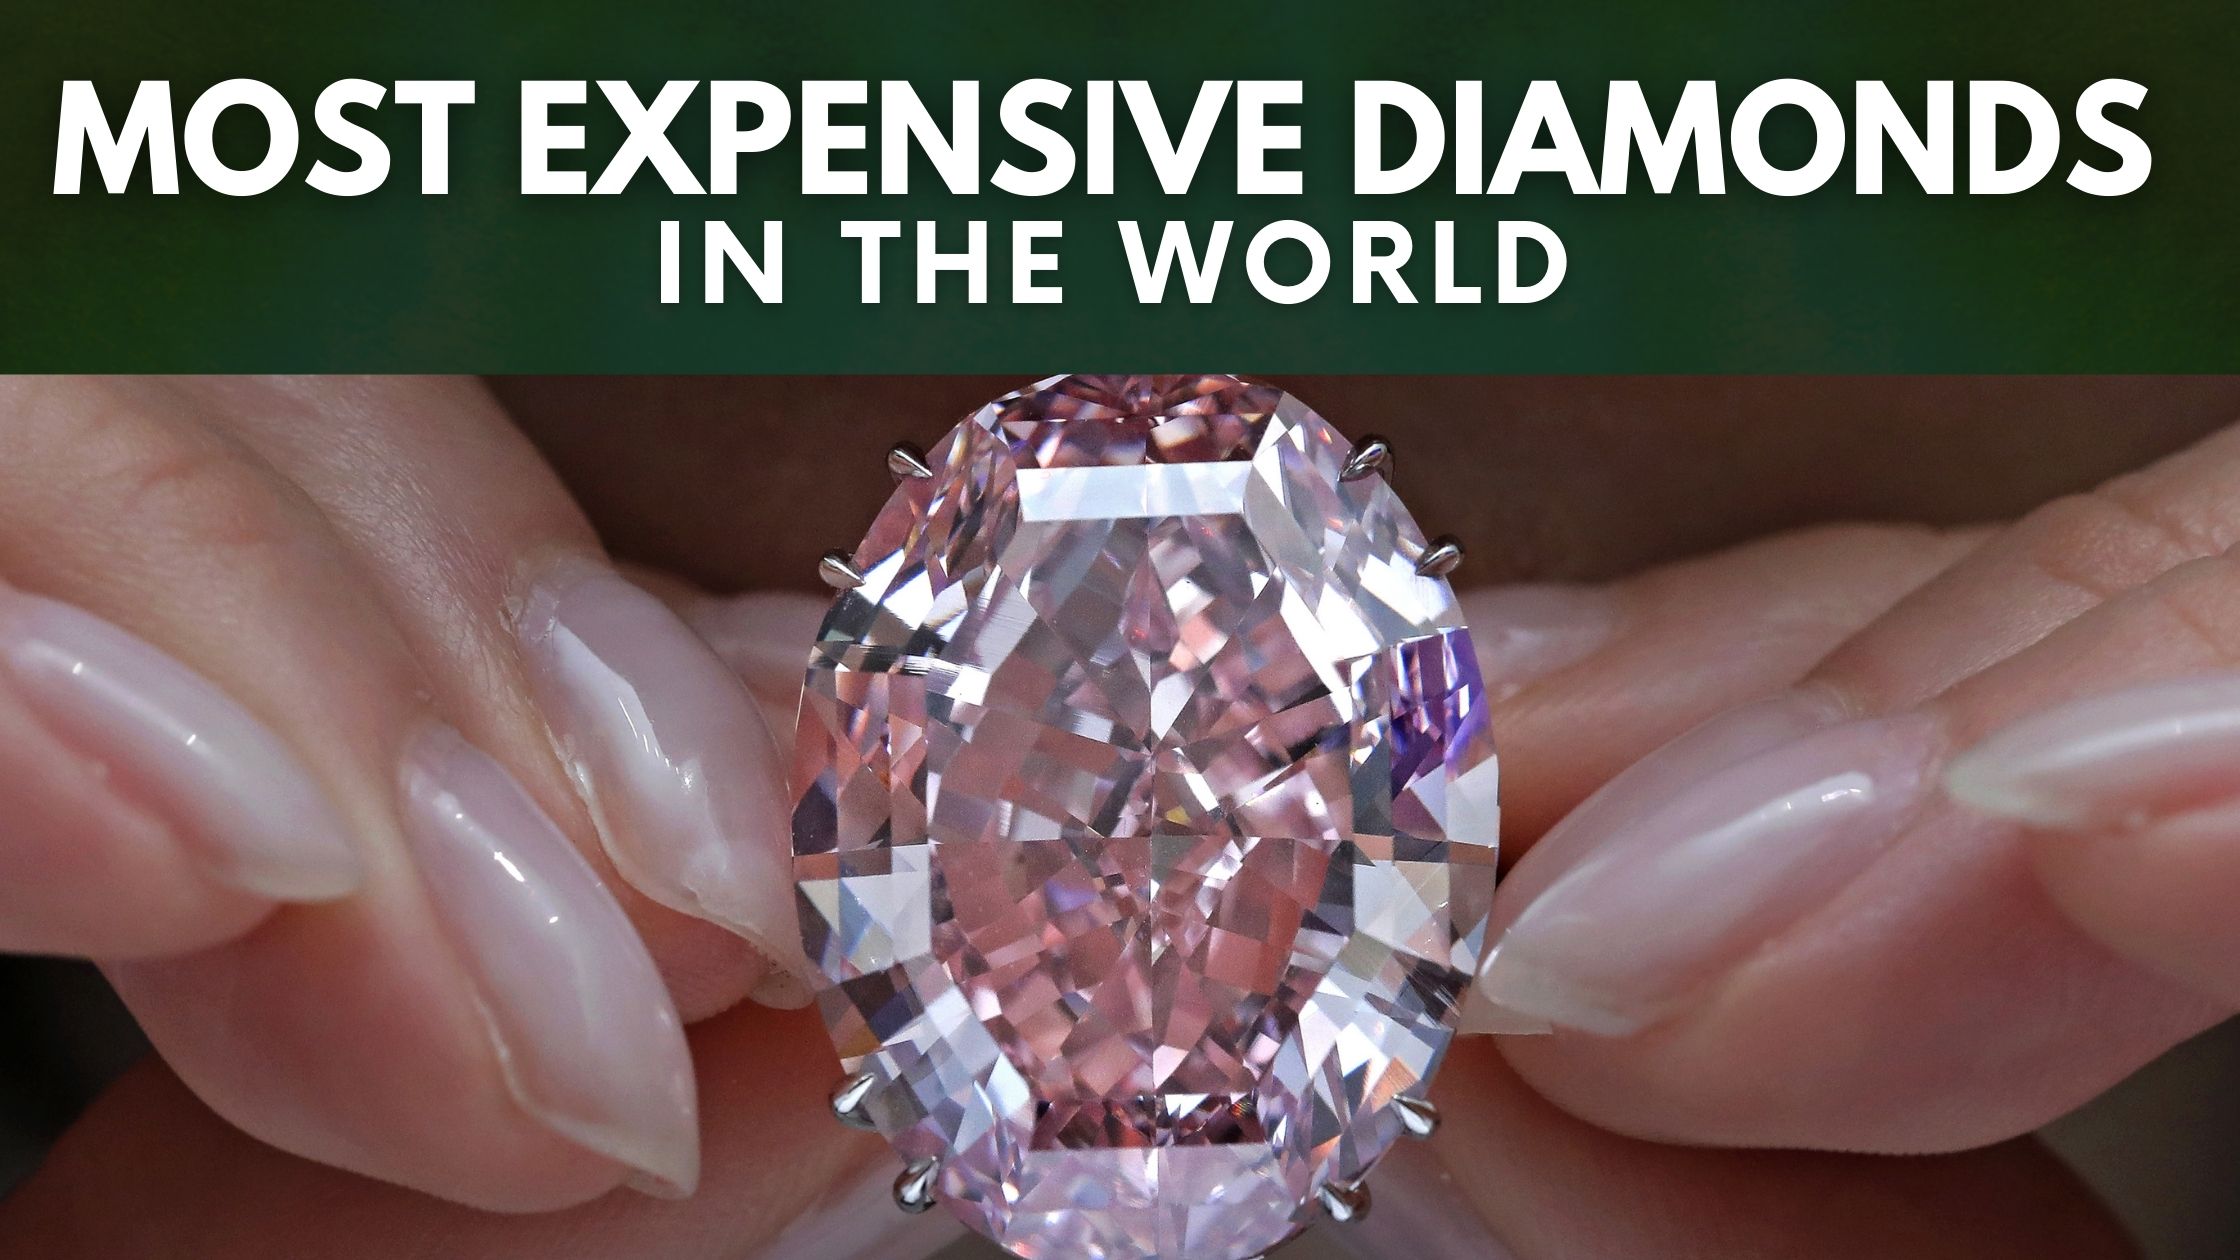 Top 10 Most Expensive Diamonds in the World (2022)